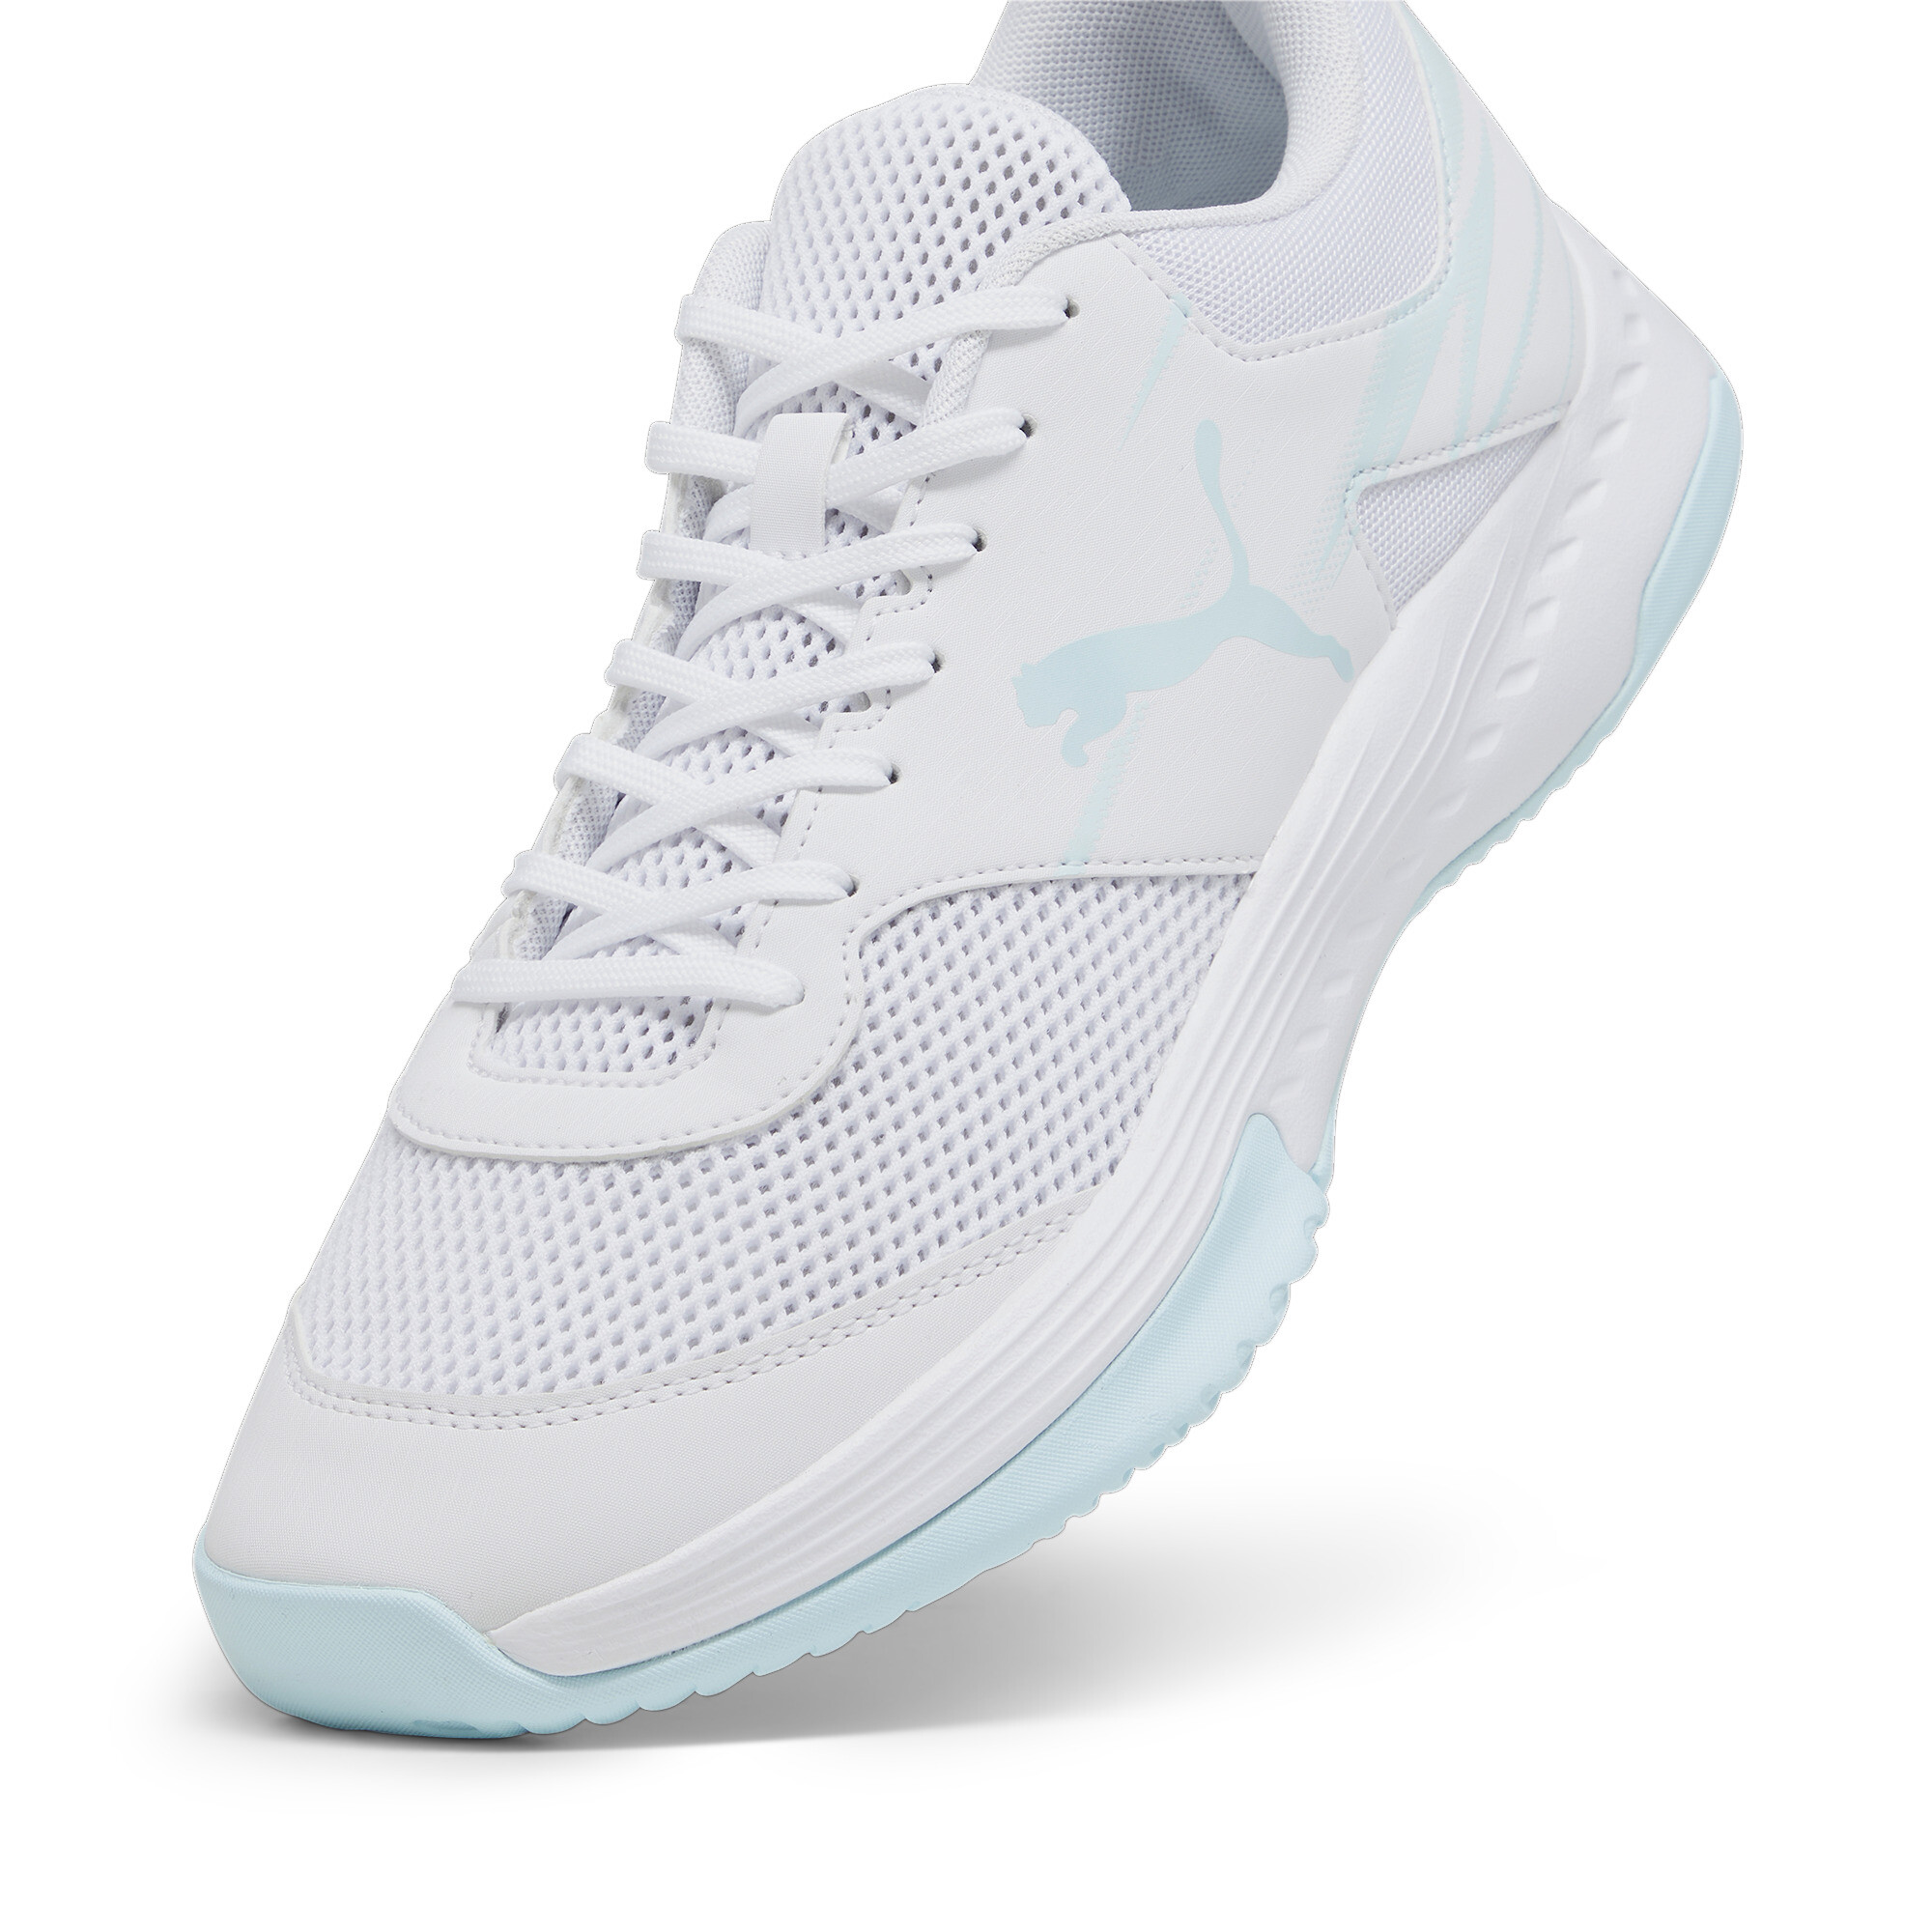 Puma Varion II Indoor Sports Shoes, White, Size 37.5, Shoes